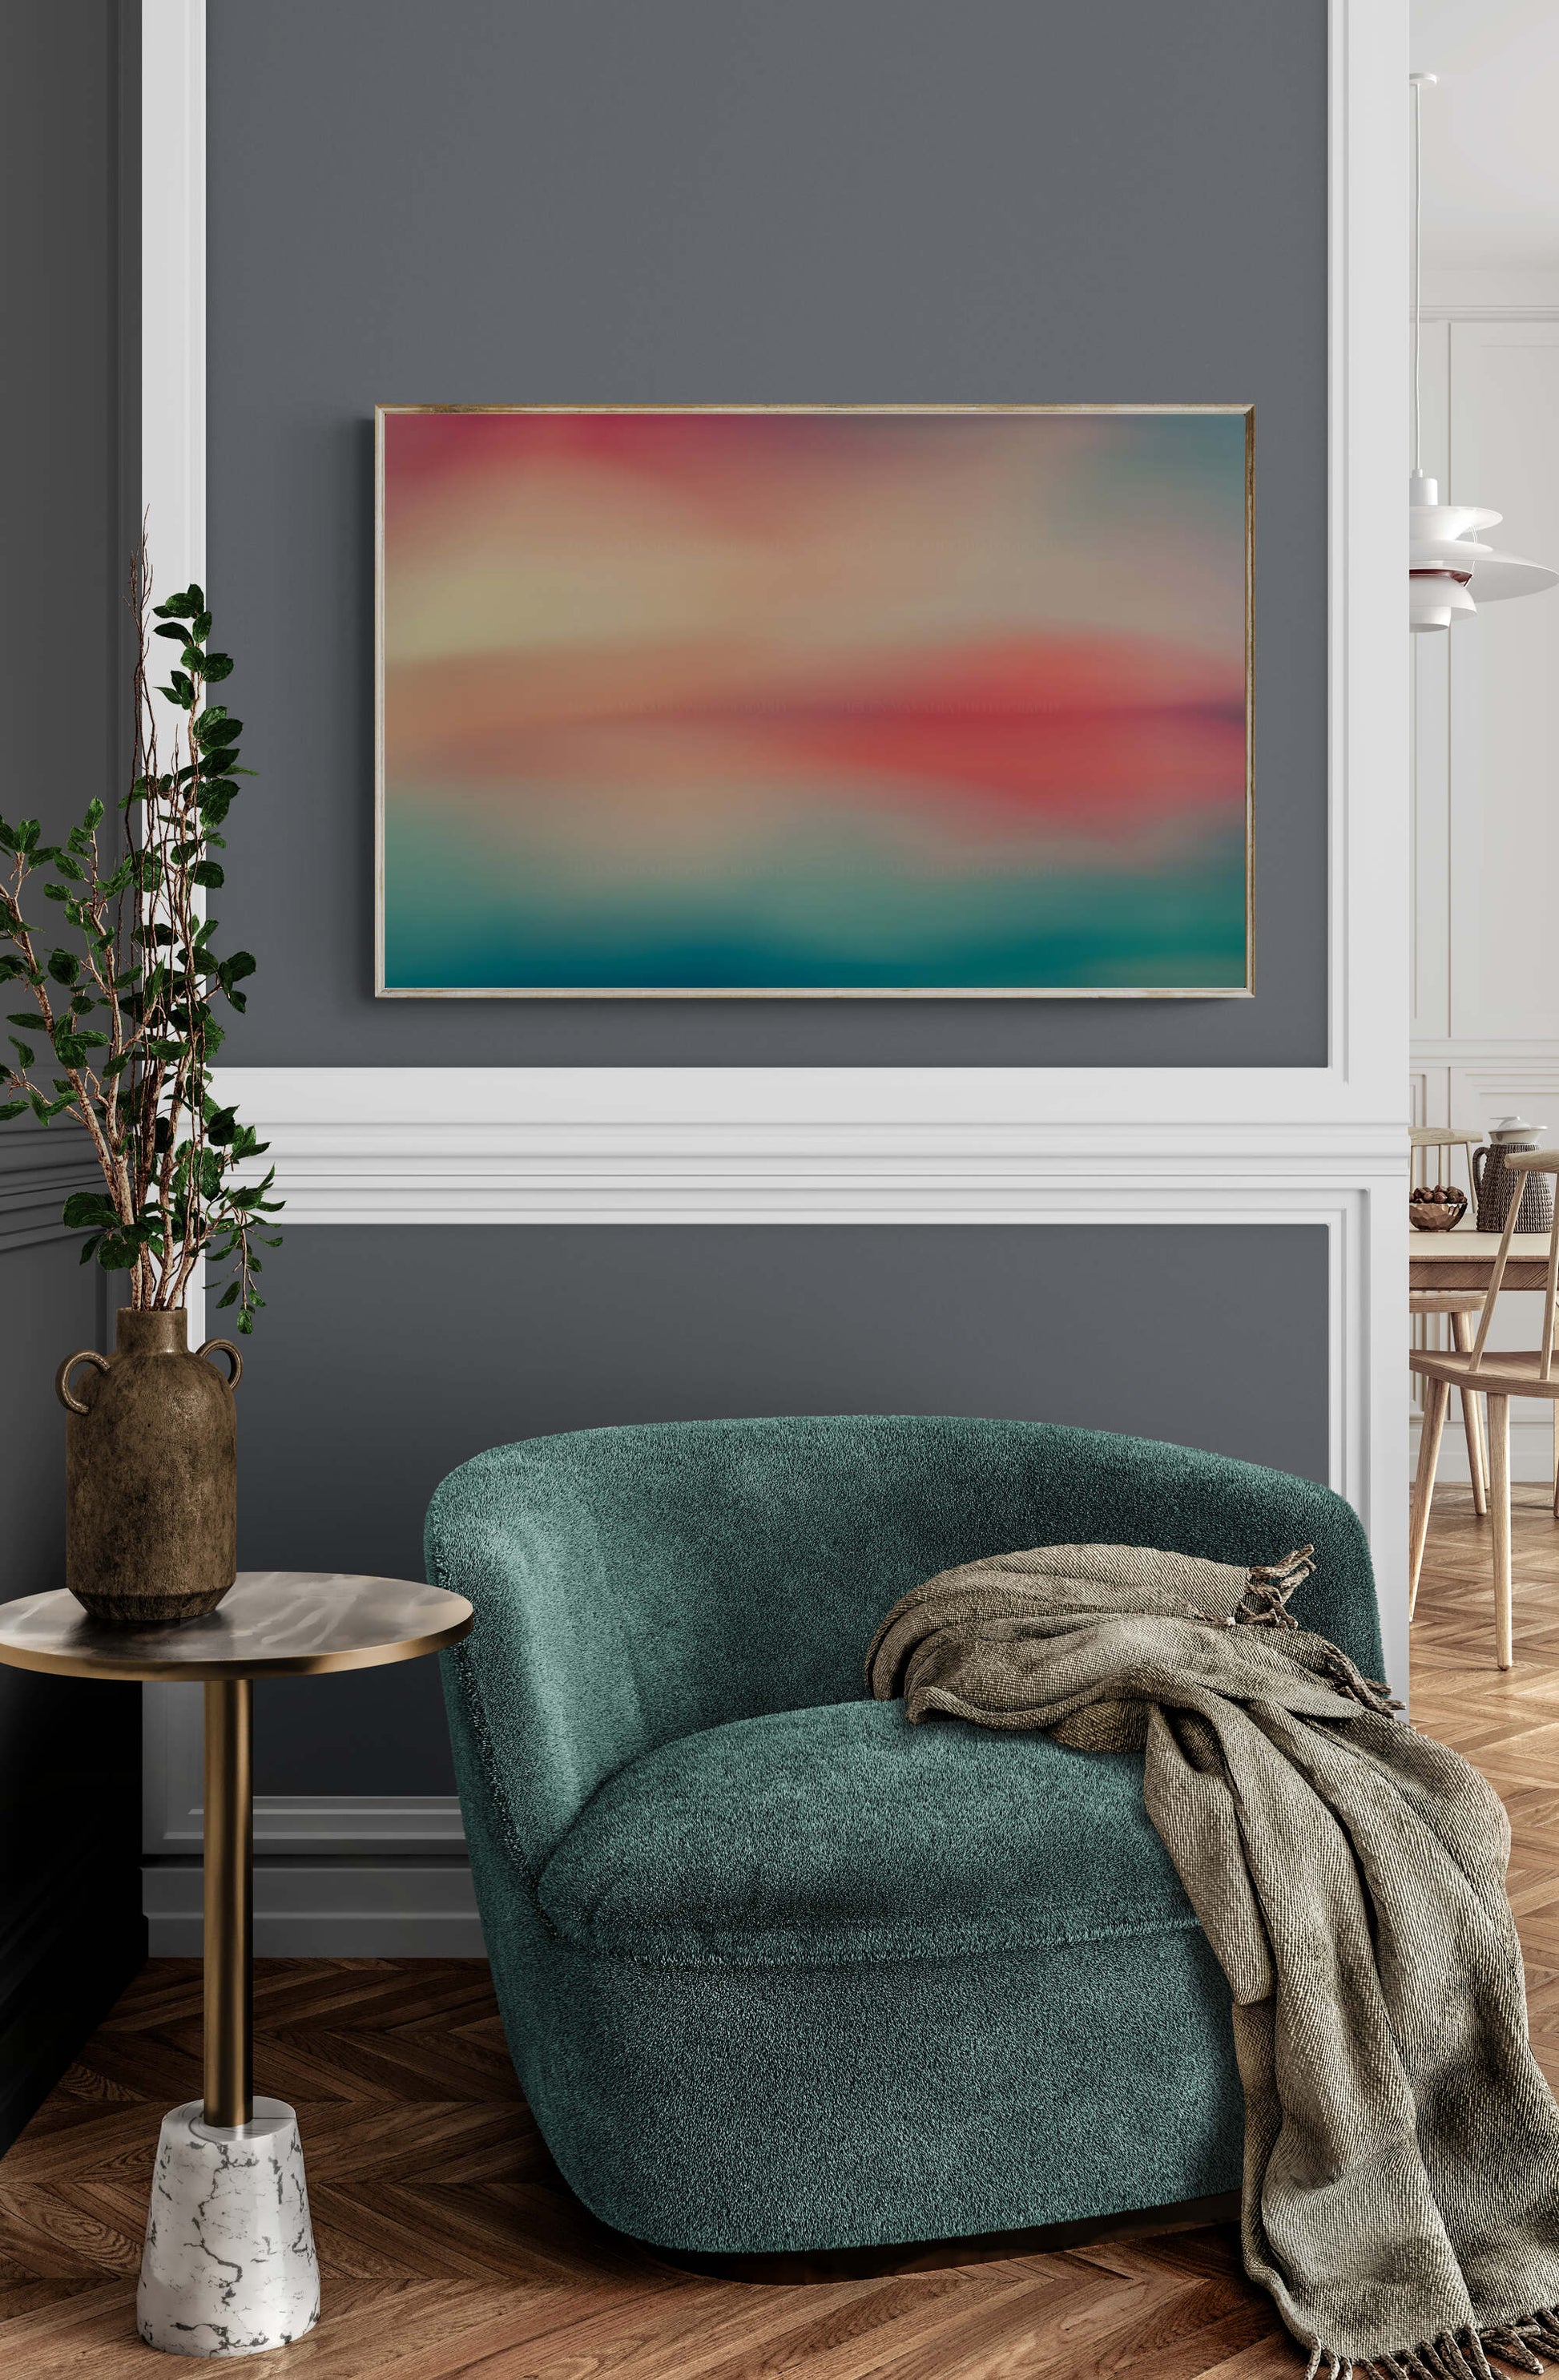 Abstract reflects of blues, greens, teals and coral and peach through long exposure as wall art in a living room